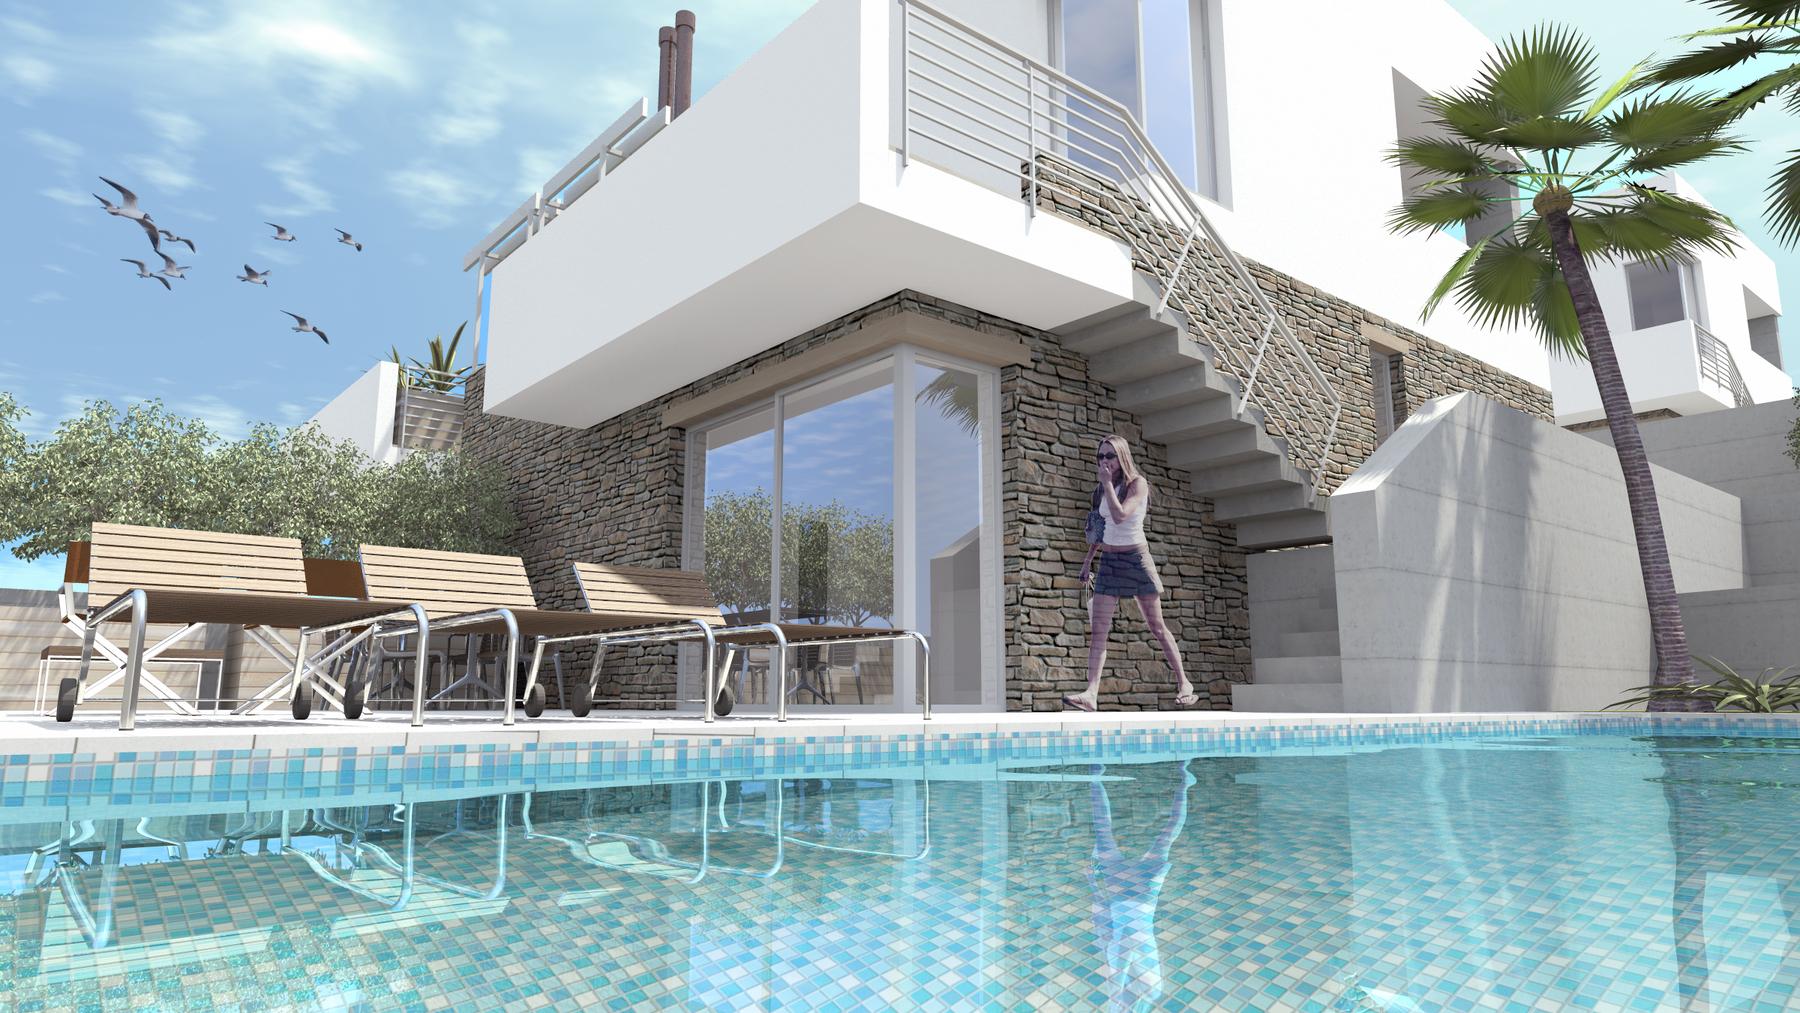 Modern villa under construction with swimming pool near the sea